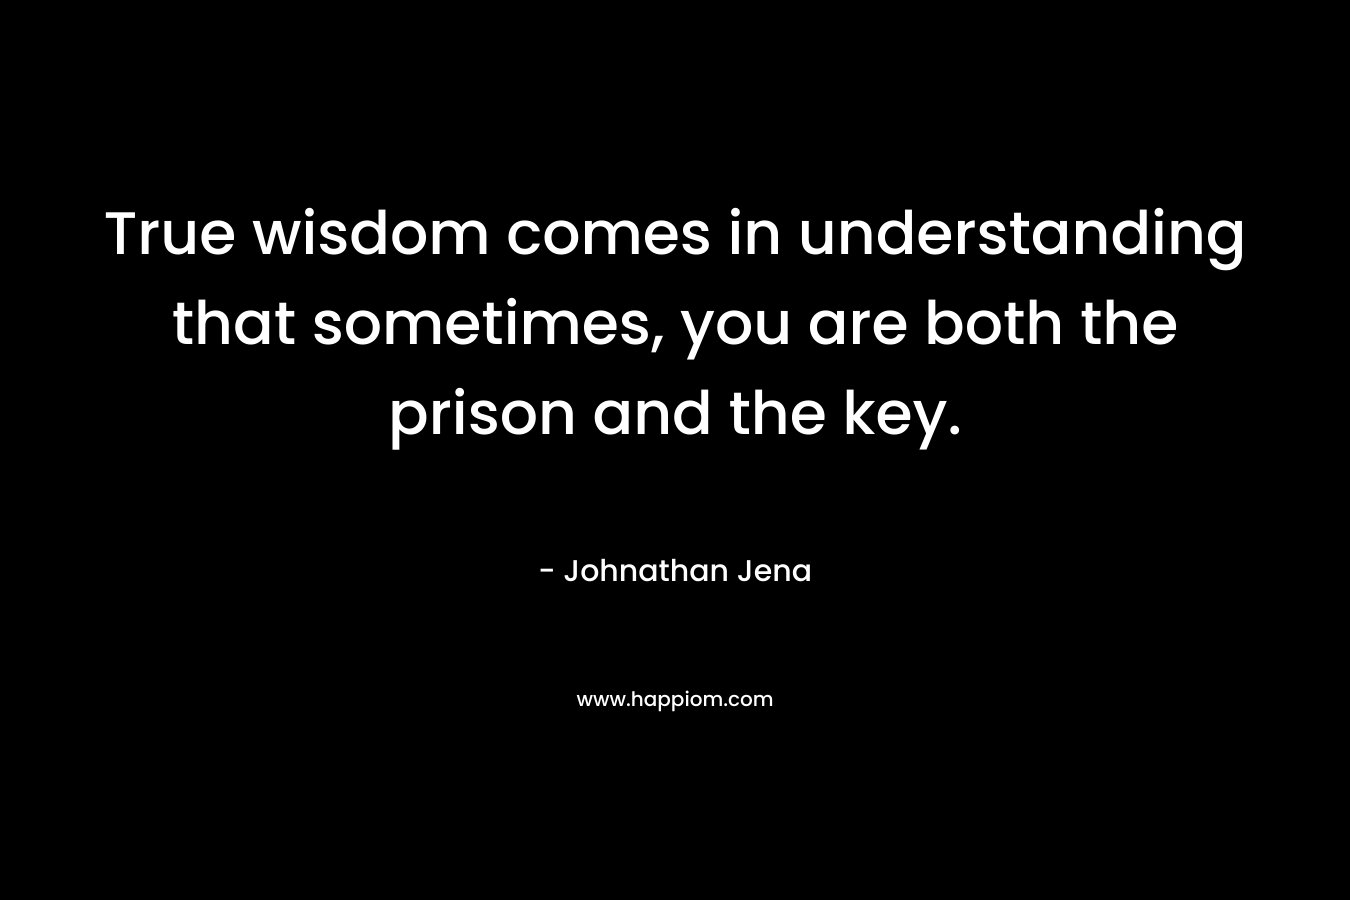 True wisdom comes in understanding that sometimes, you are both the prison and the key.